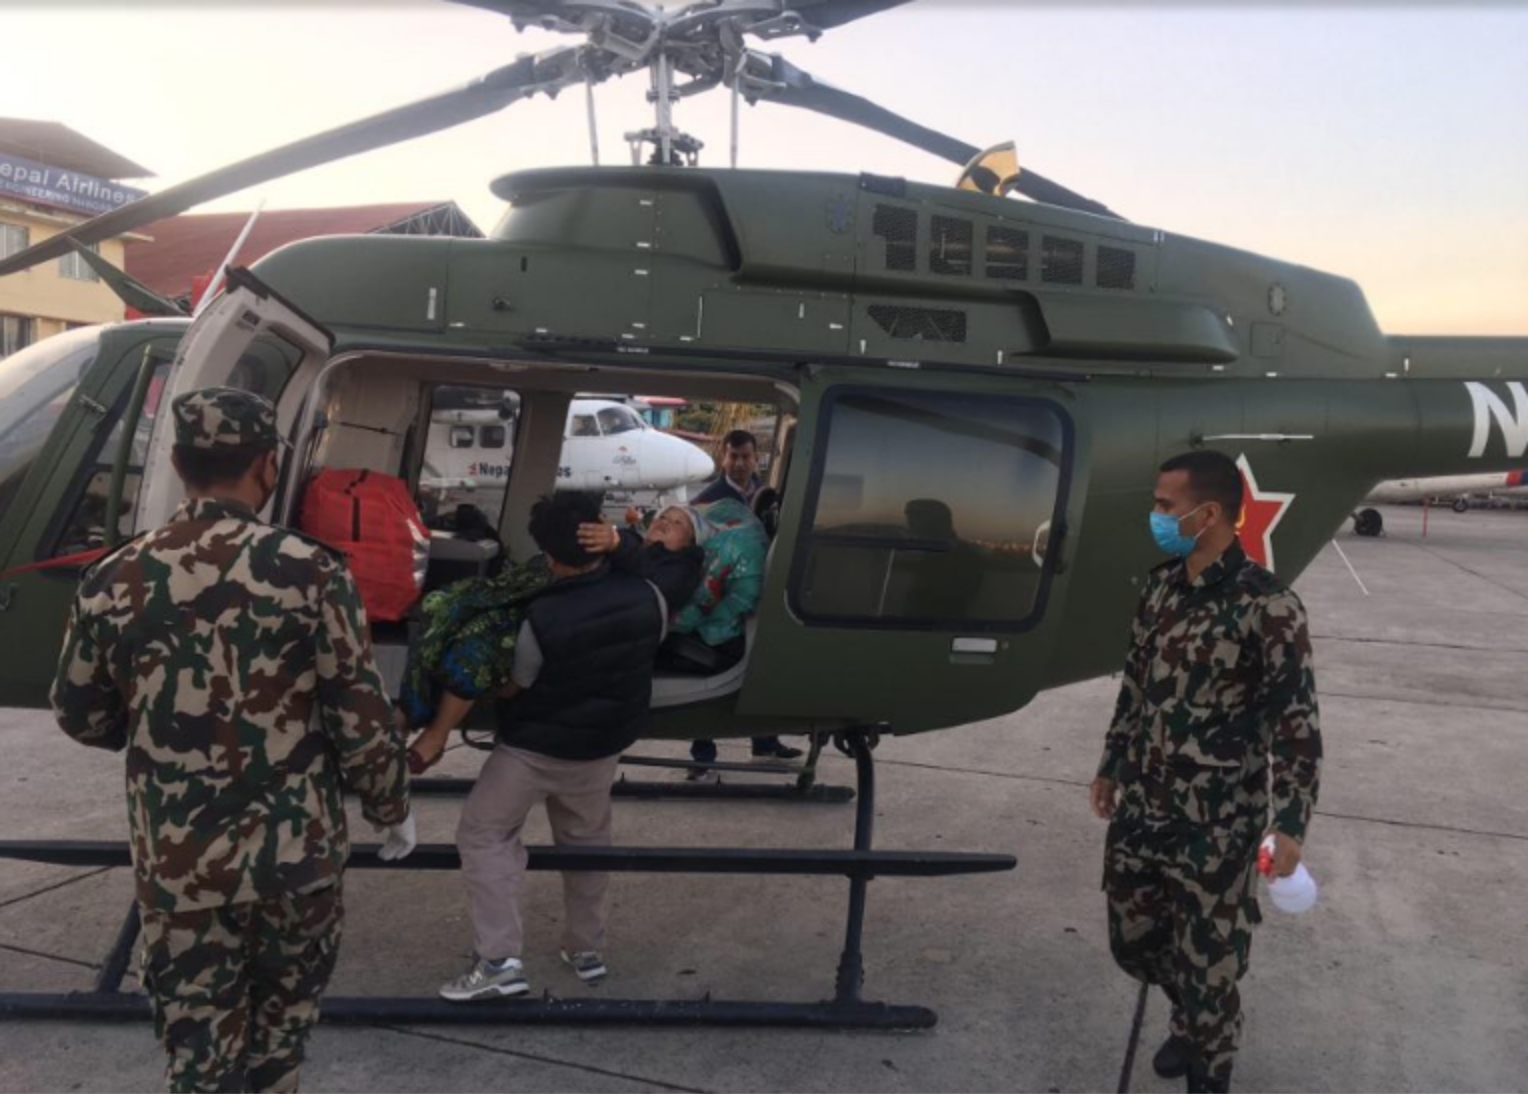 Helicopter is an important means in rescuing obstetrics emergency cases residing rural, remote districts of Nepal.